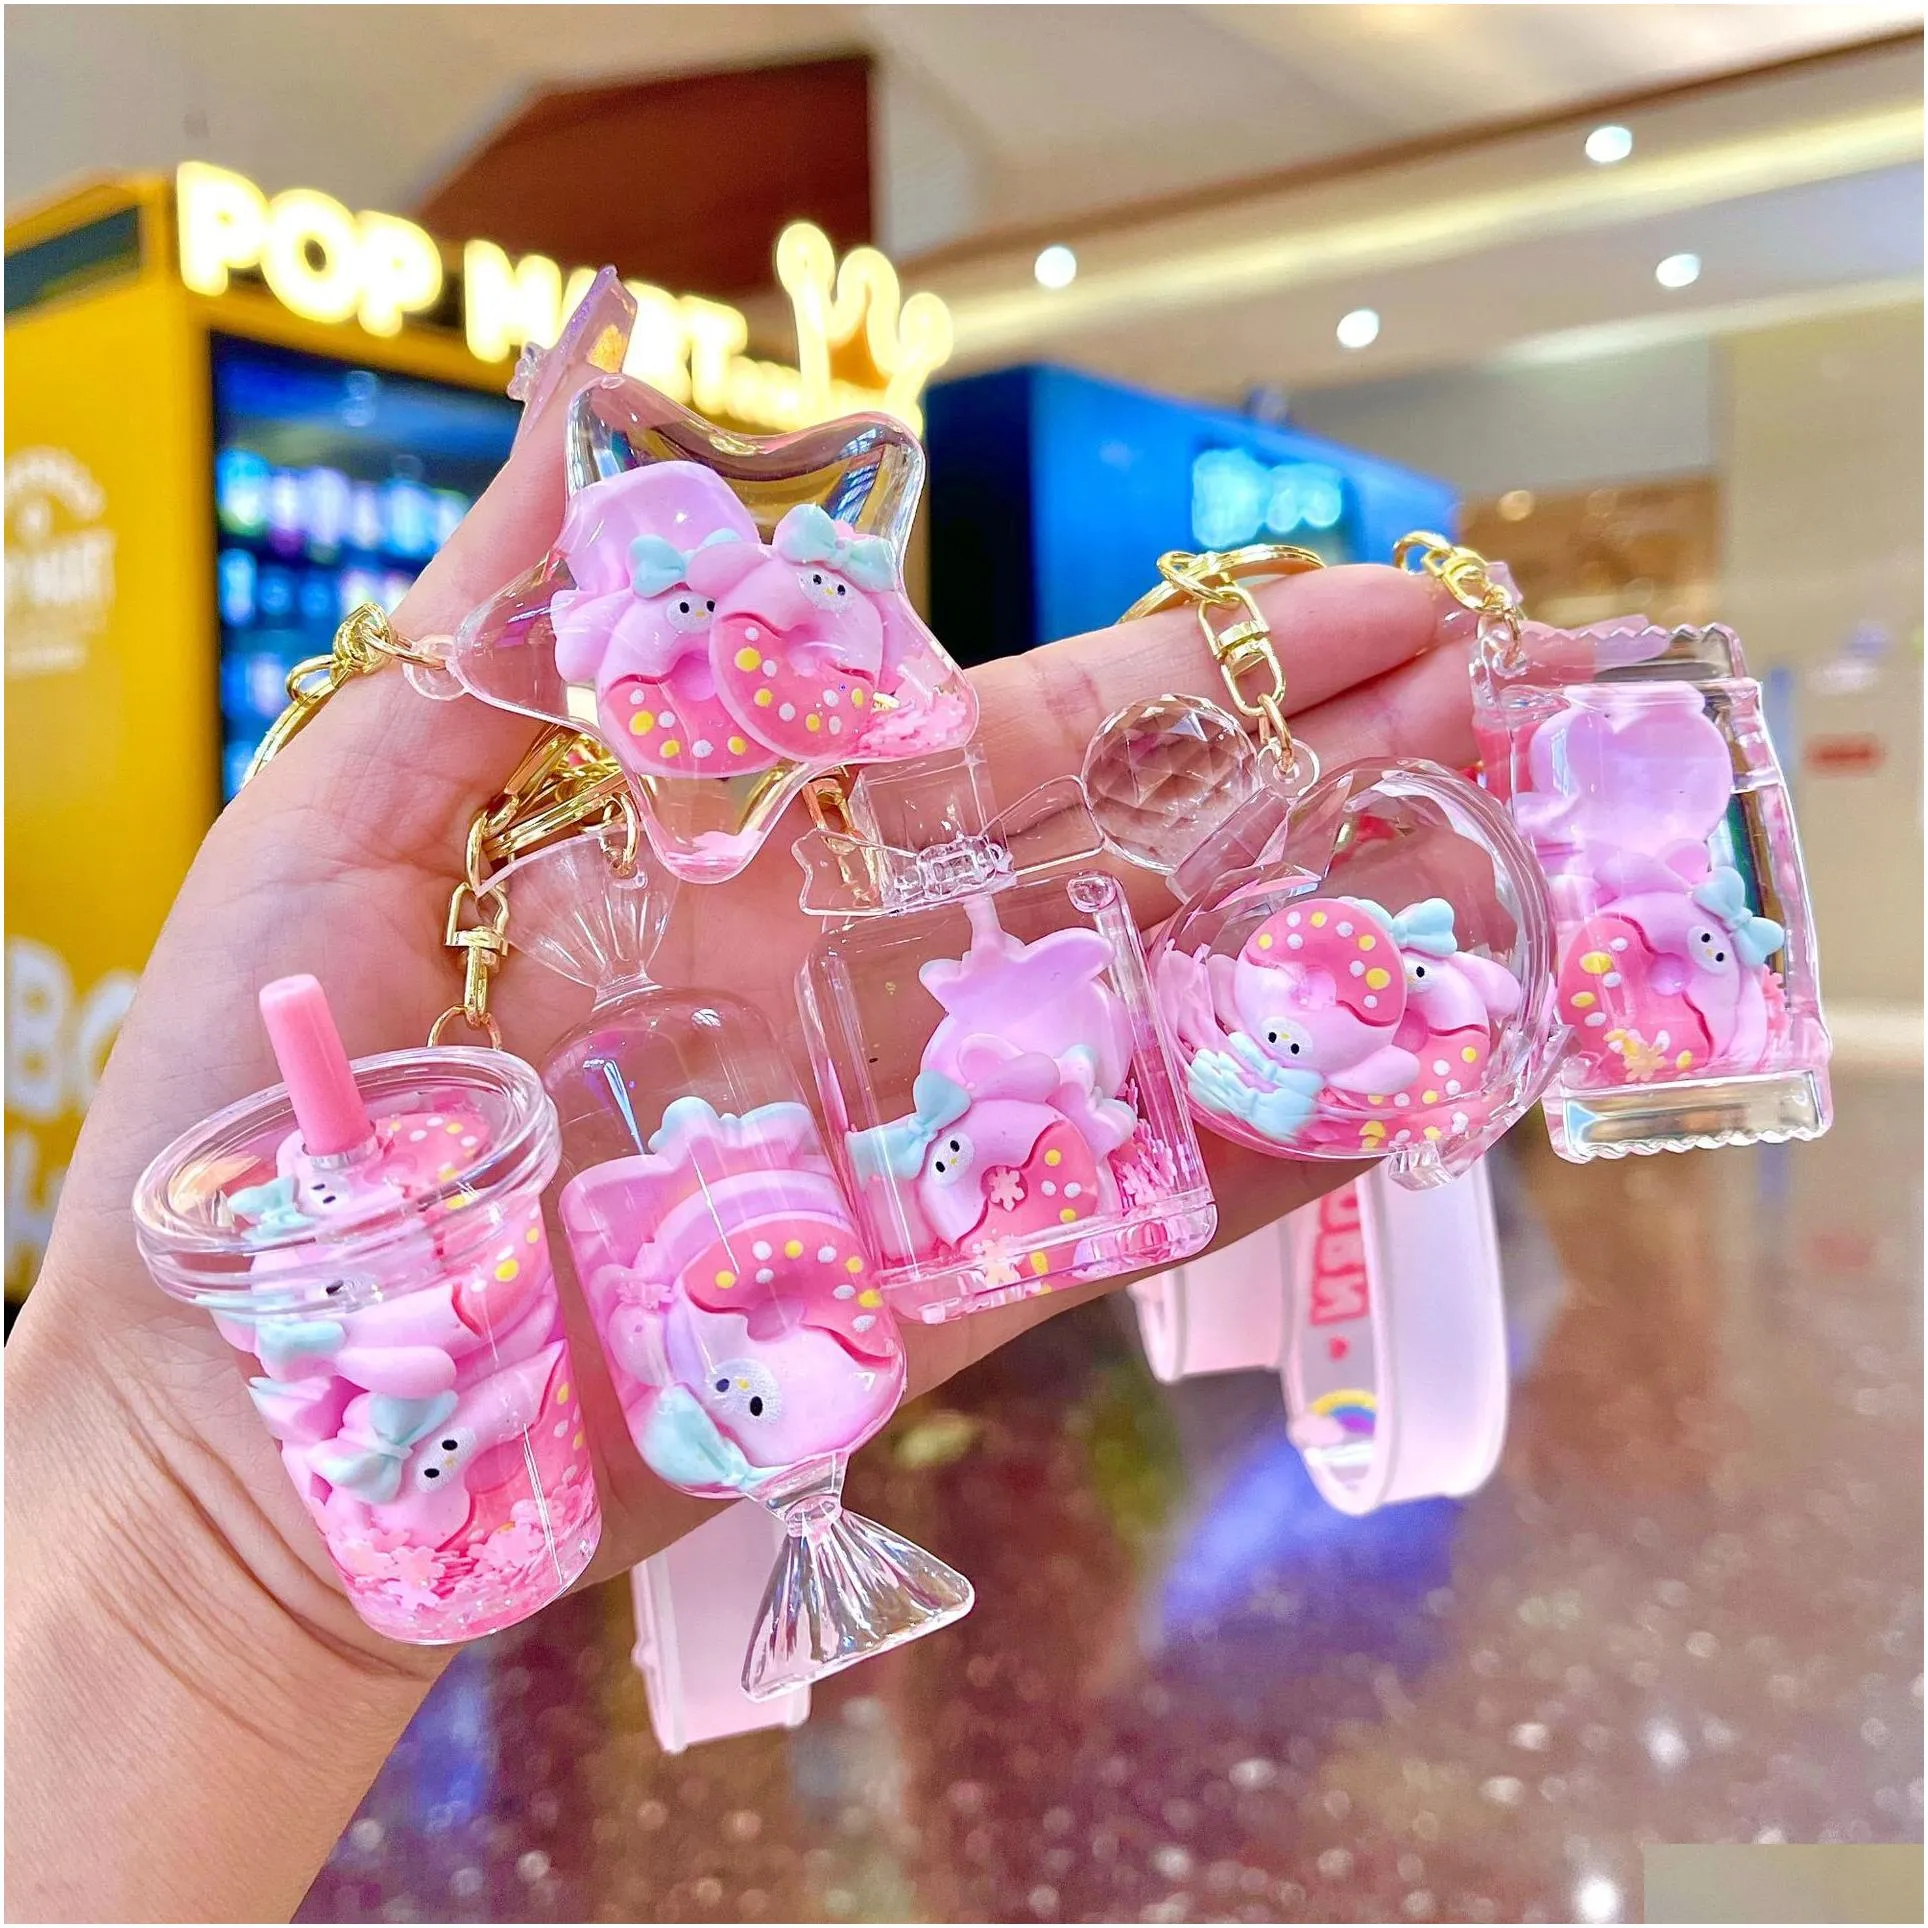 Other Toys Cute Pink Donut Quicksand Bottle Acrylic Keychain School Bag Car Cartoon Key Pendant As A Toy Or Gift For Anyone Drop Deliv Dhr8K